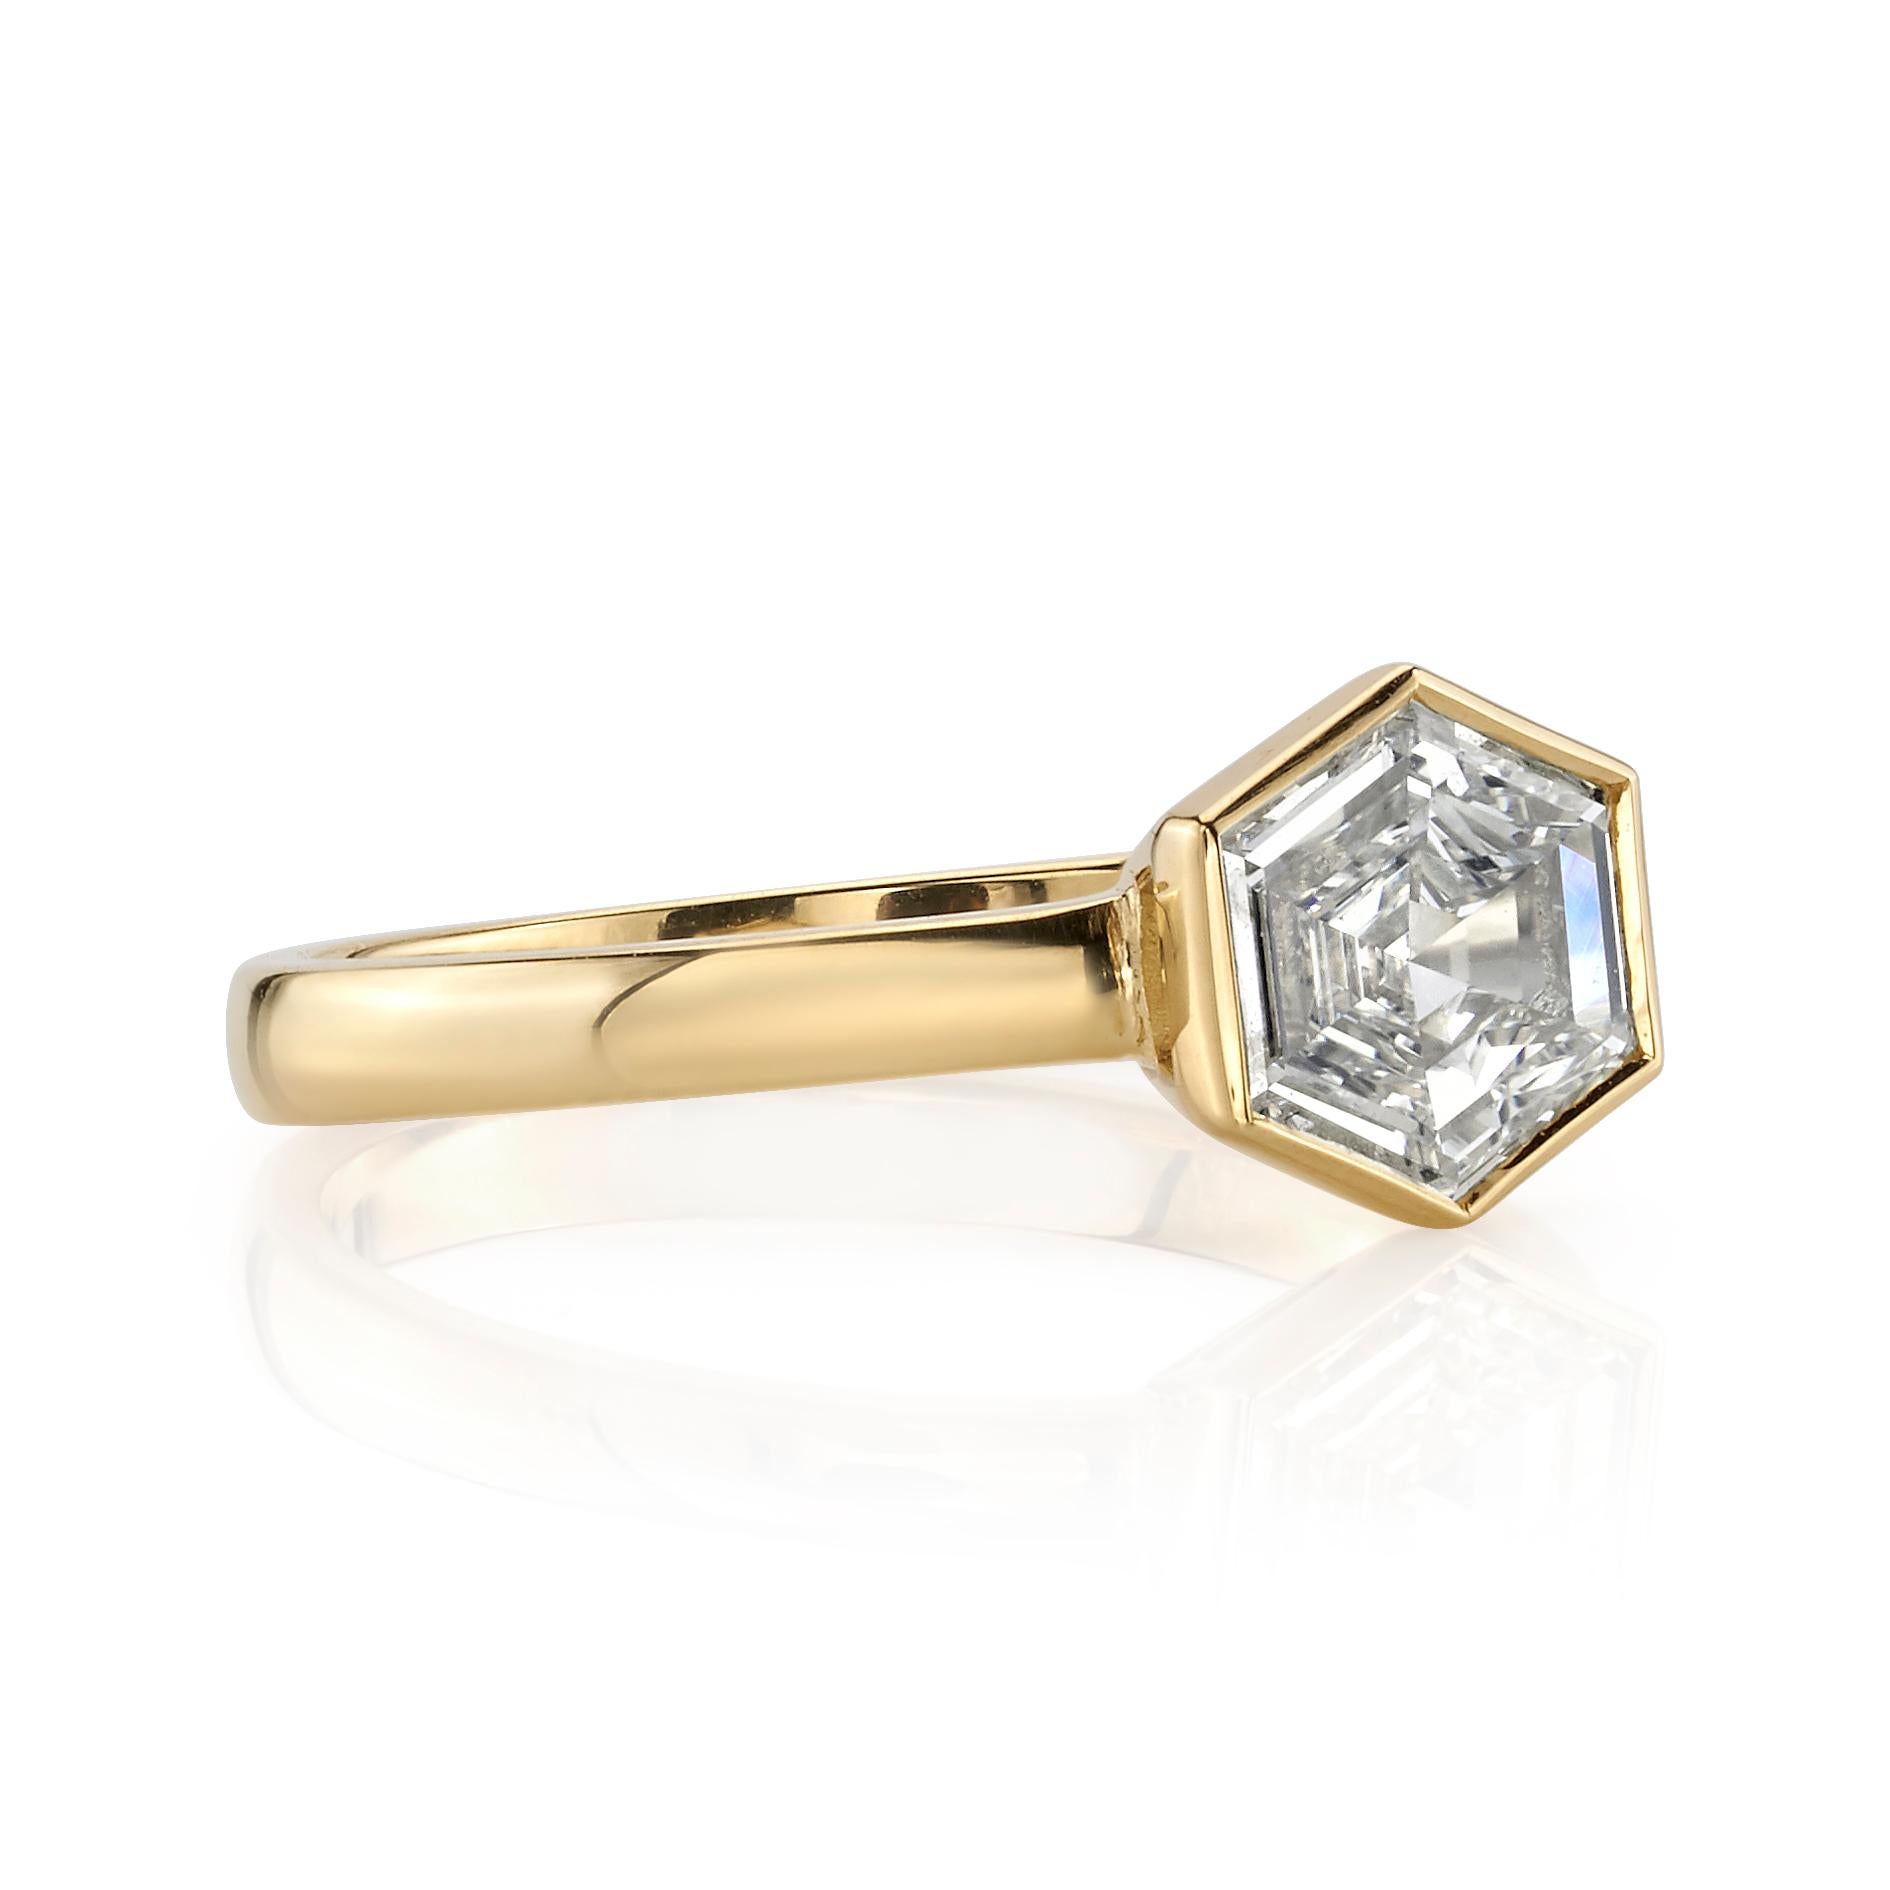 0.89ctw K/VVS1 GIA certified Hexagonal Step cut diamond set in a handcrafted 18K yellow gold mounting.

Ring is currently a size 6 and can be sized to fit.